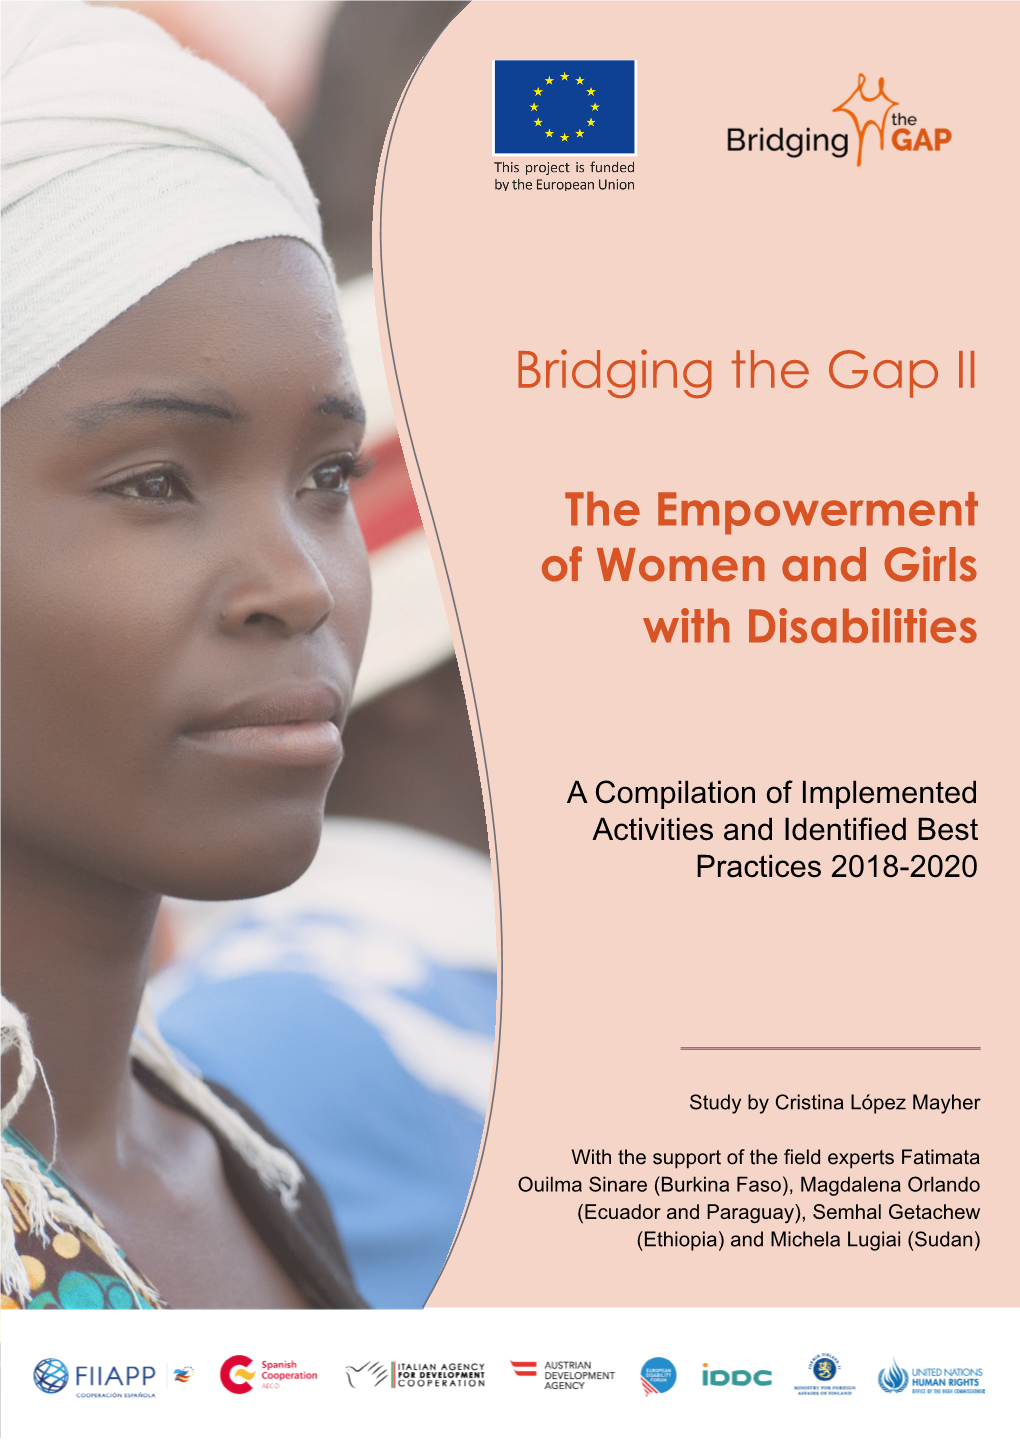 Bridging the Gap II. the Empowerment of Women and Girls with Disabilities